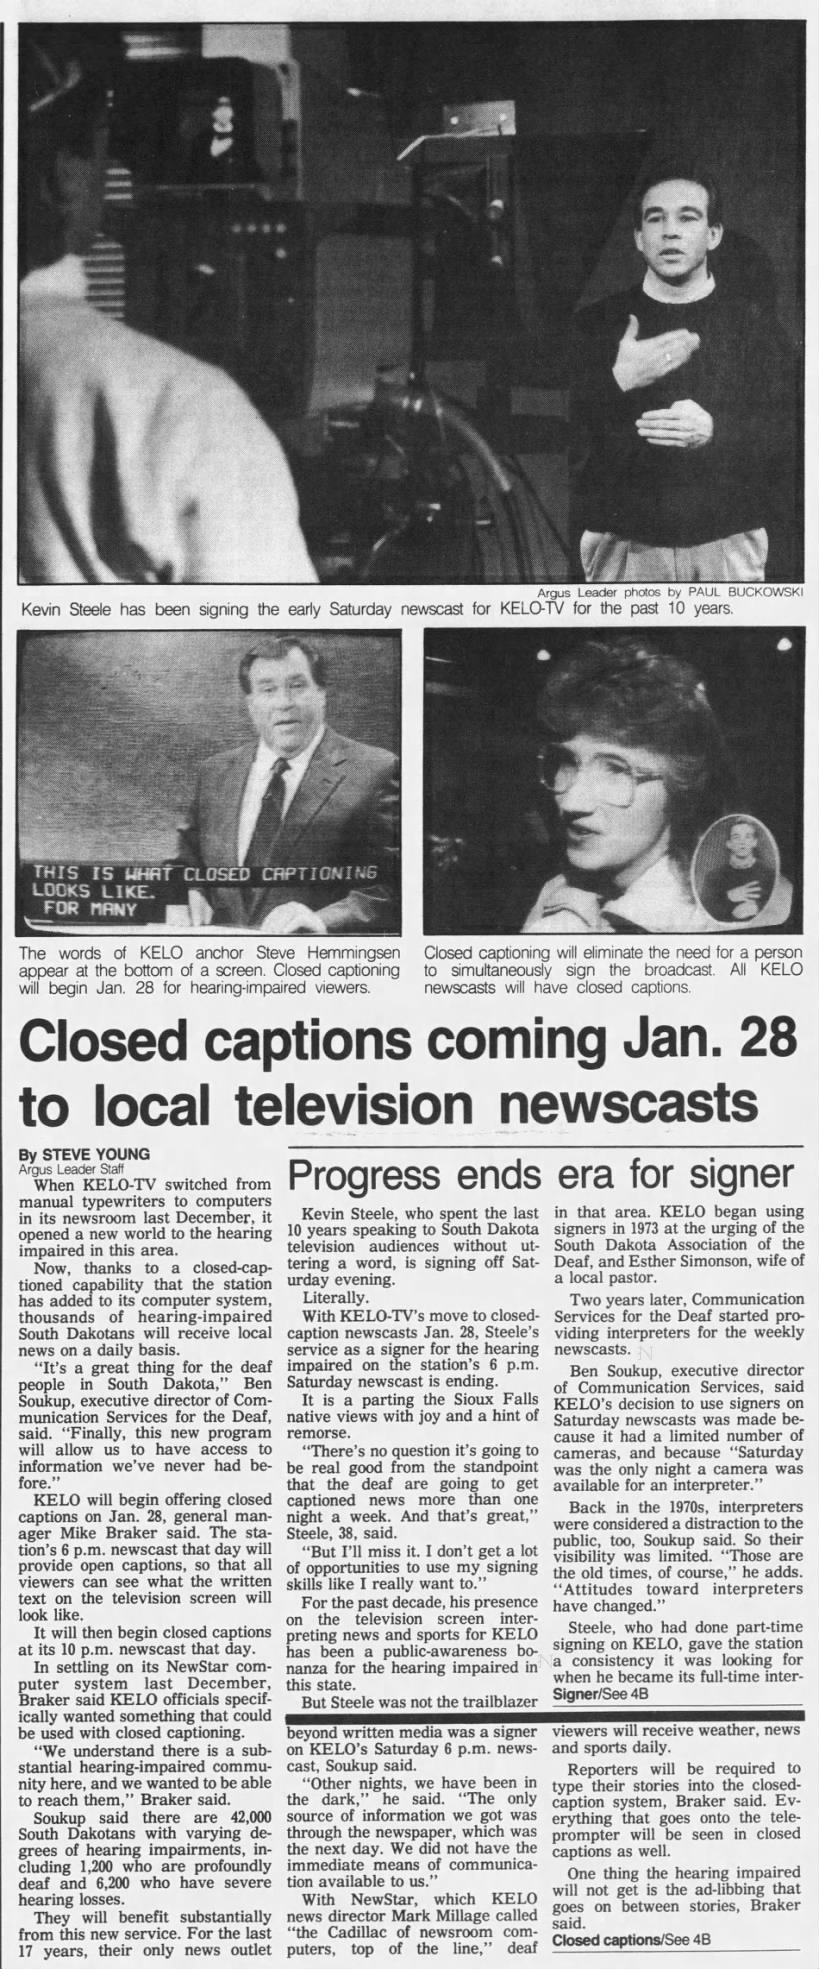 Closed captions coming Jan. 28 to local television newscasts